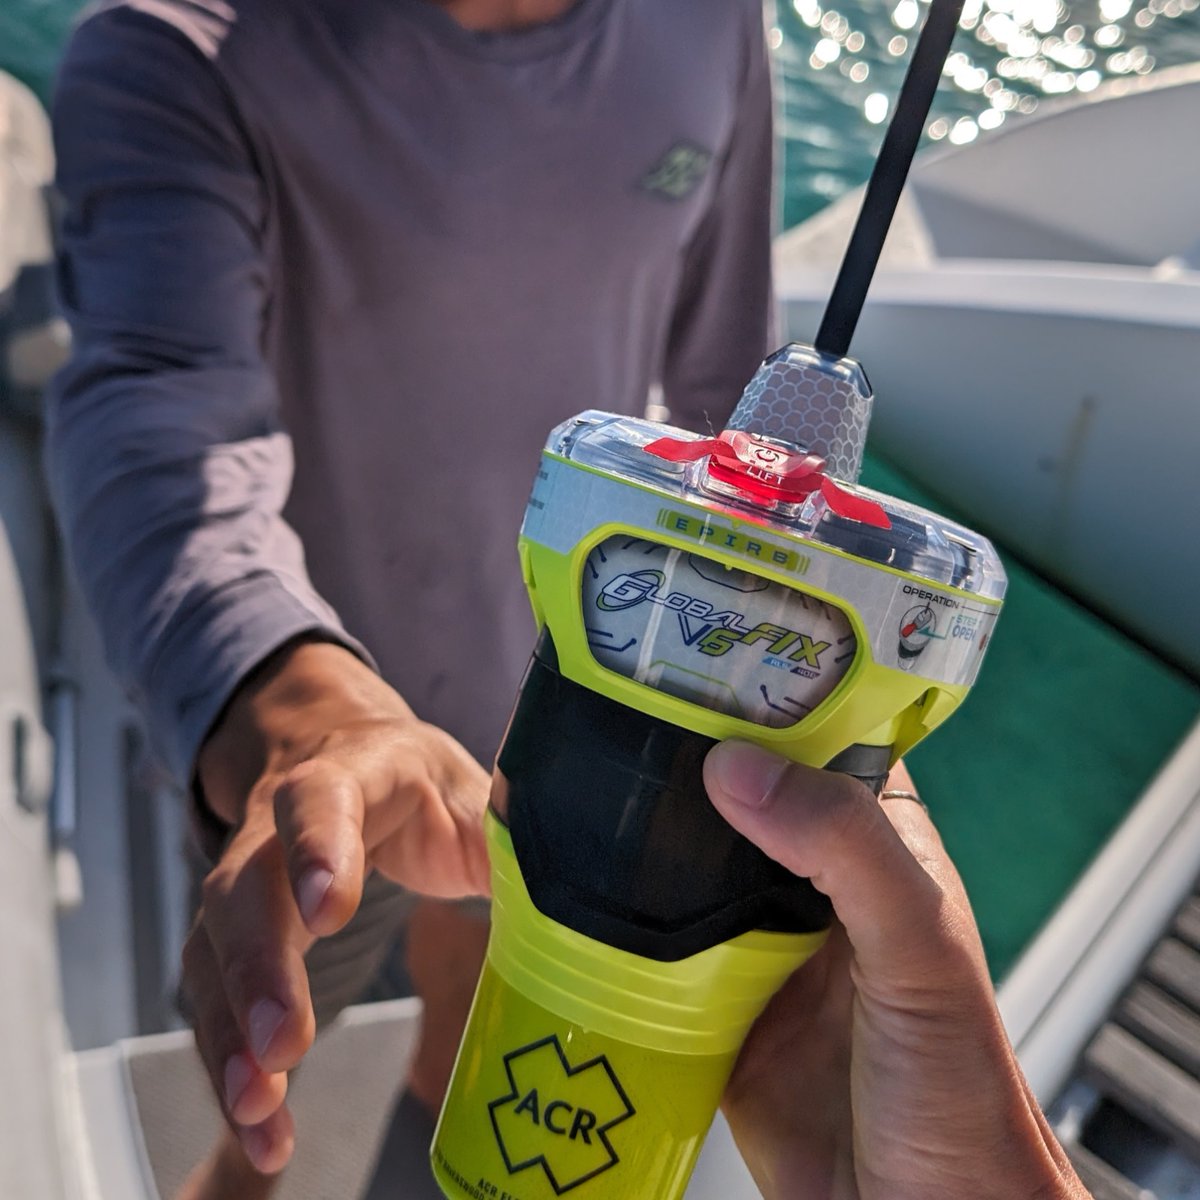 🌊 Kick off National Safe Boating Week with a safety essential: an EPIRB! An Emergency Position Indicating Radio Beacon alerts rescuers to your location in case of an emergency on the water.  #SafeBoatingWeek #EPIRB #BoatingSafety #wearit

Learn More: zurl.co/dO2V